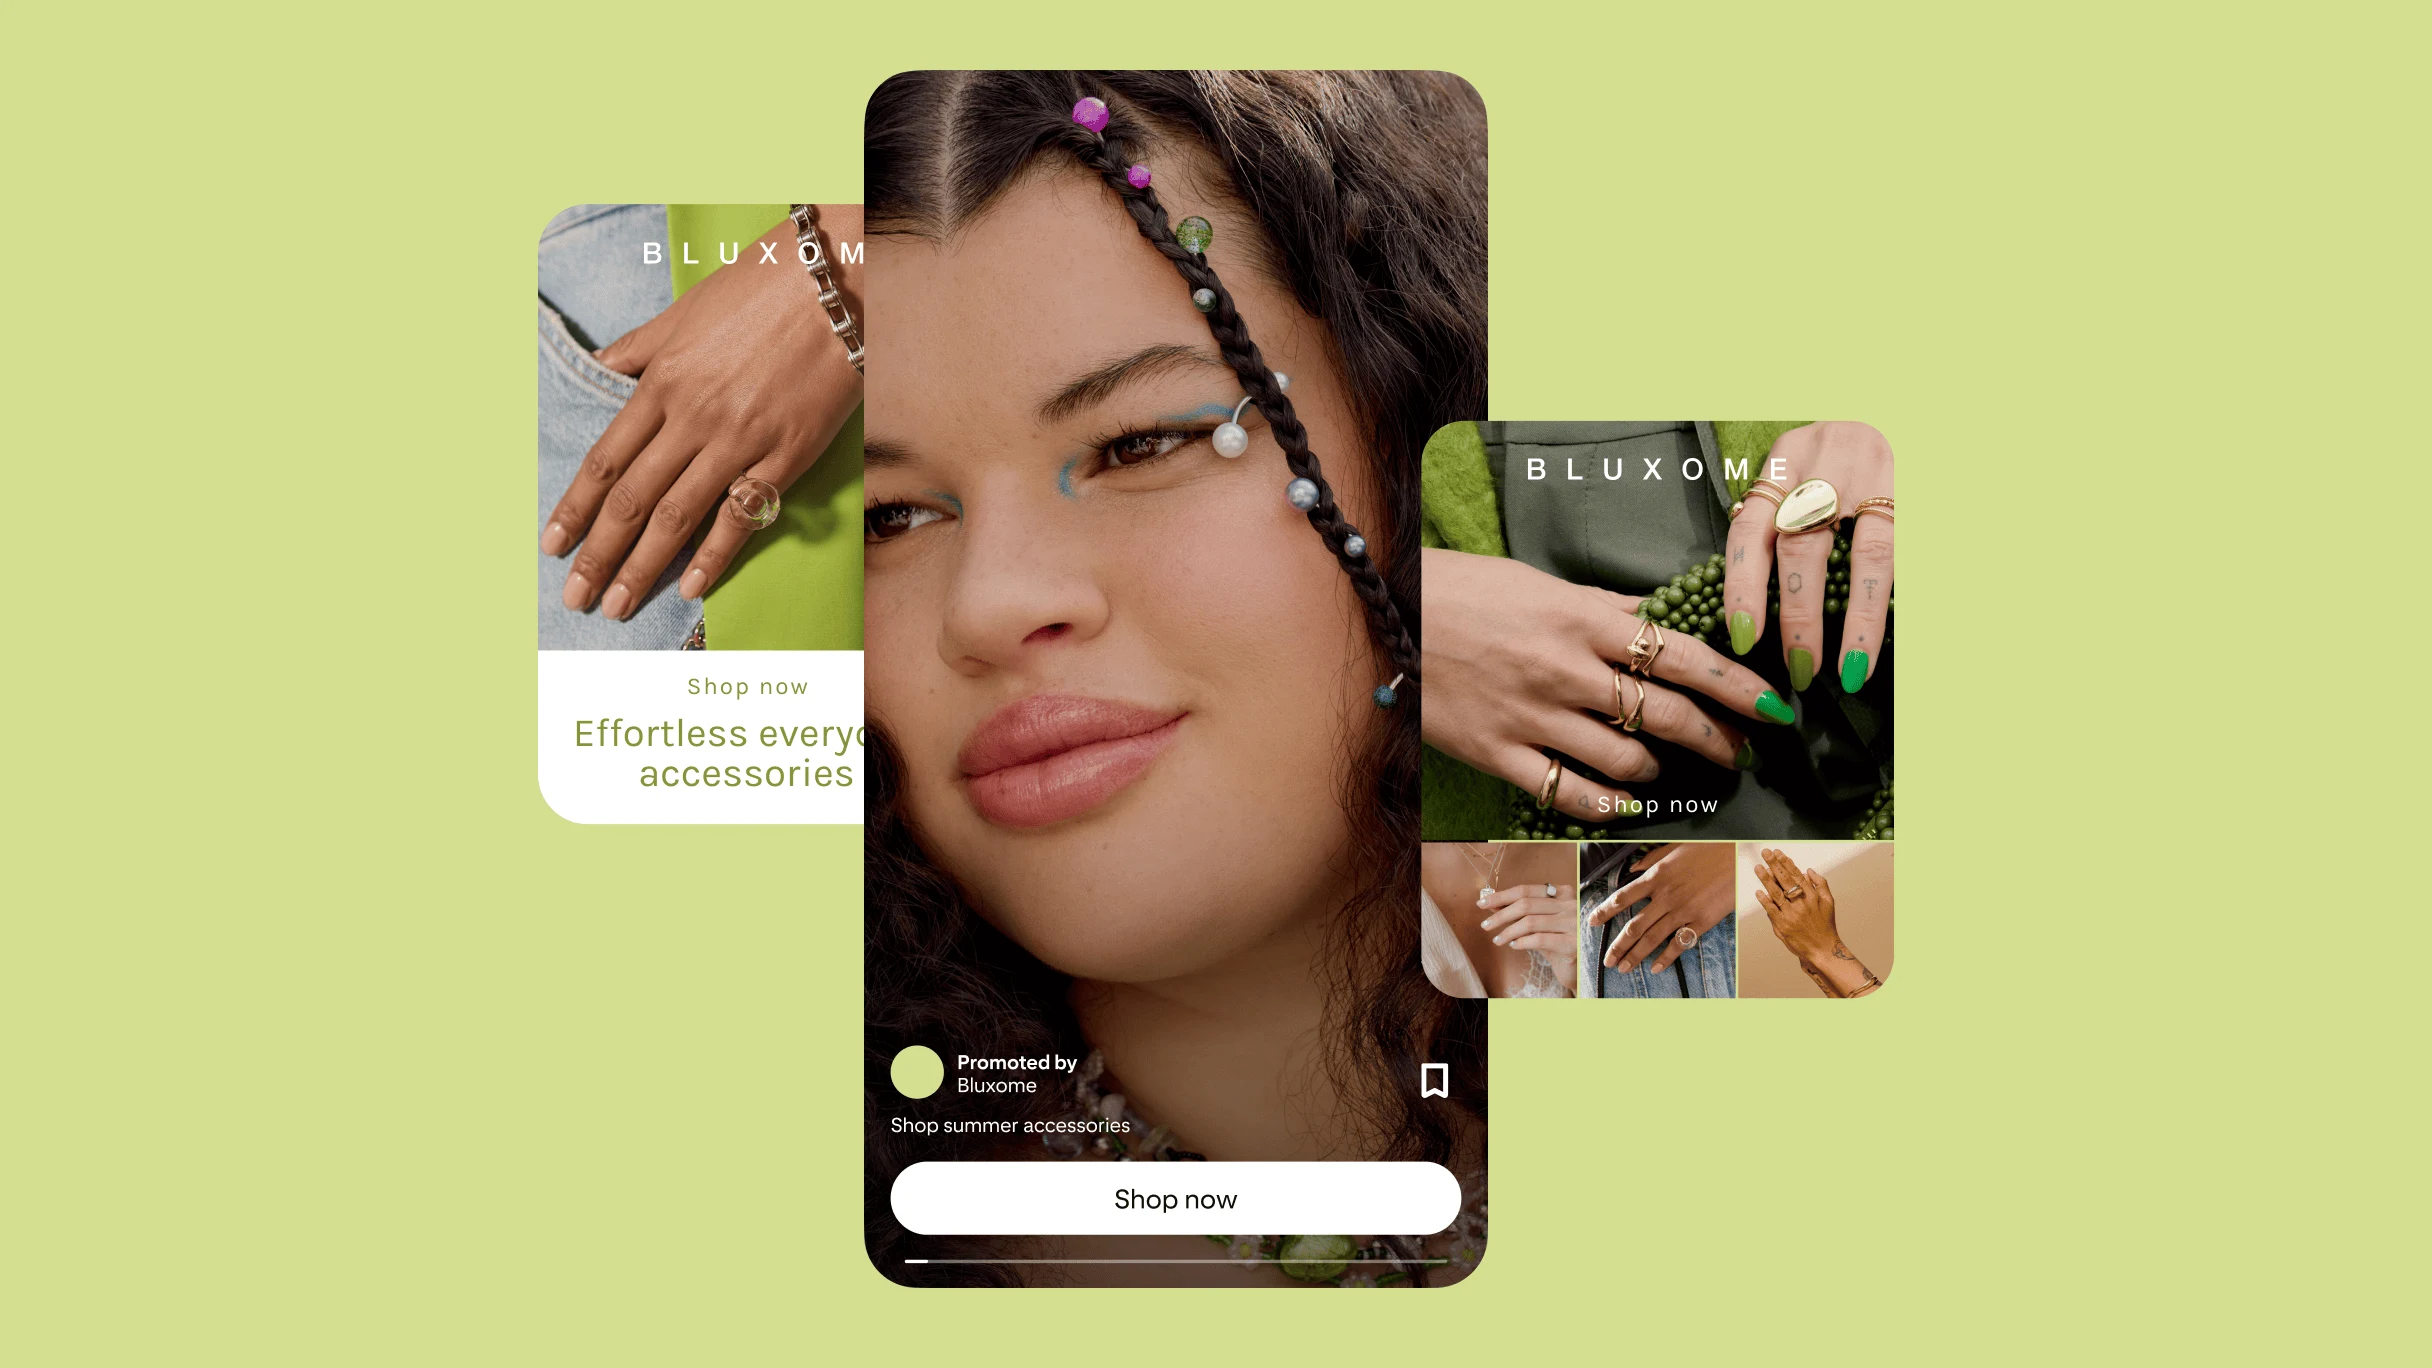 Three ads on a green background: The first shows a hand with a bracelet and ring with the thumb in a jeans pocket; the second displays a close-up of a woman's face with a braid and accessories; the third shows four images, each highlighting various rings.